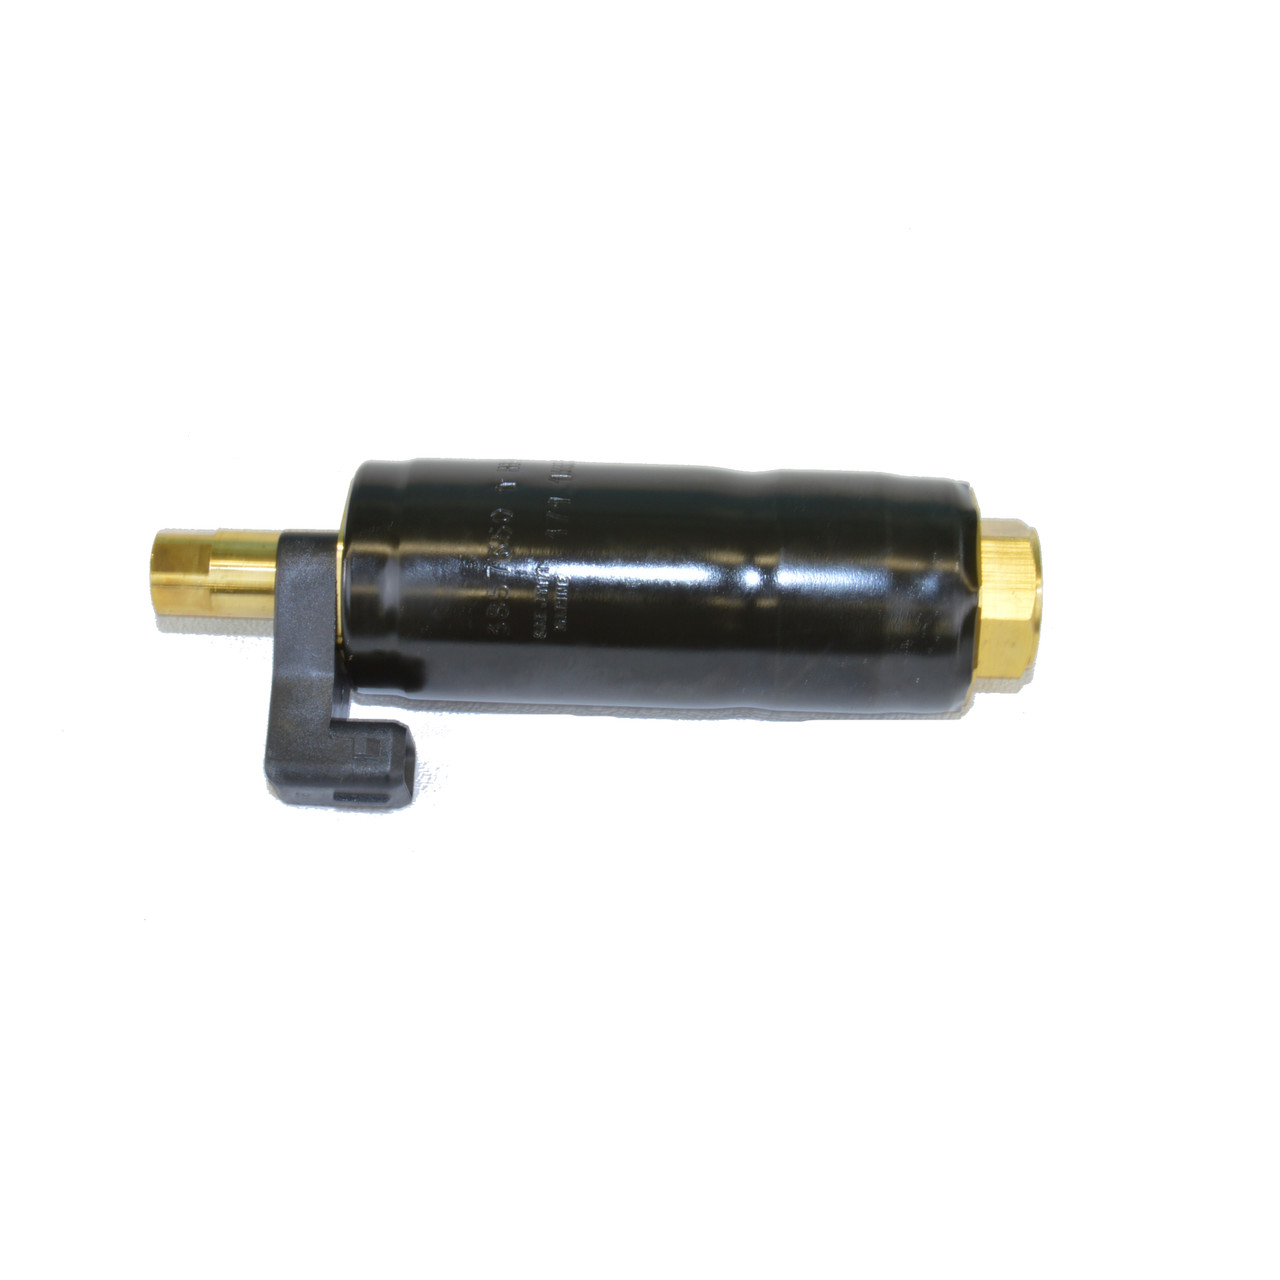 Fuel Pump - PCM Pro Tec Injection from 1992-1995, PCM # RA080022